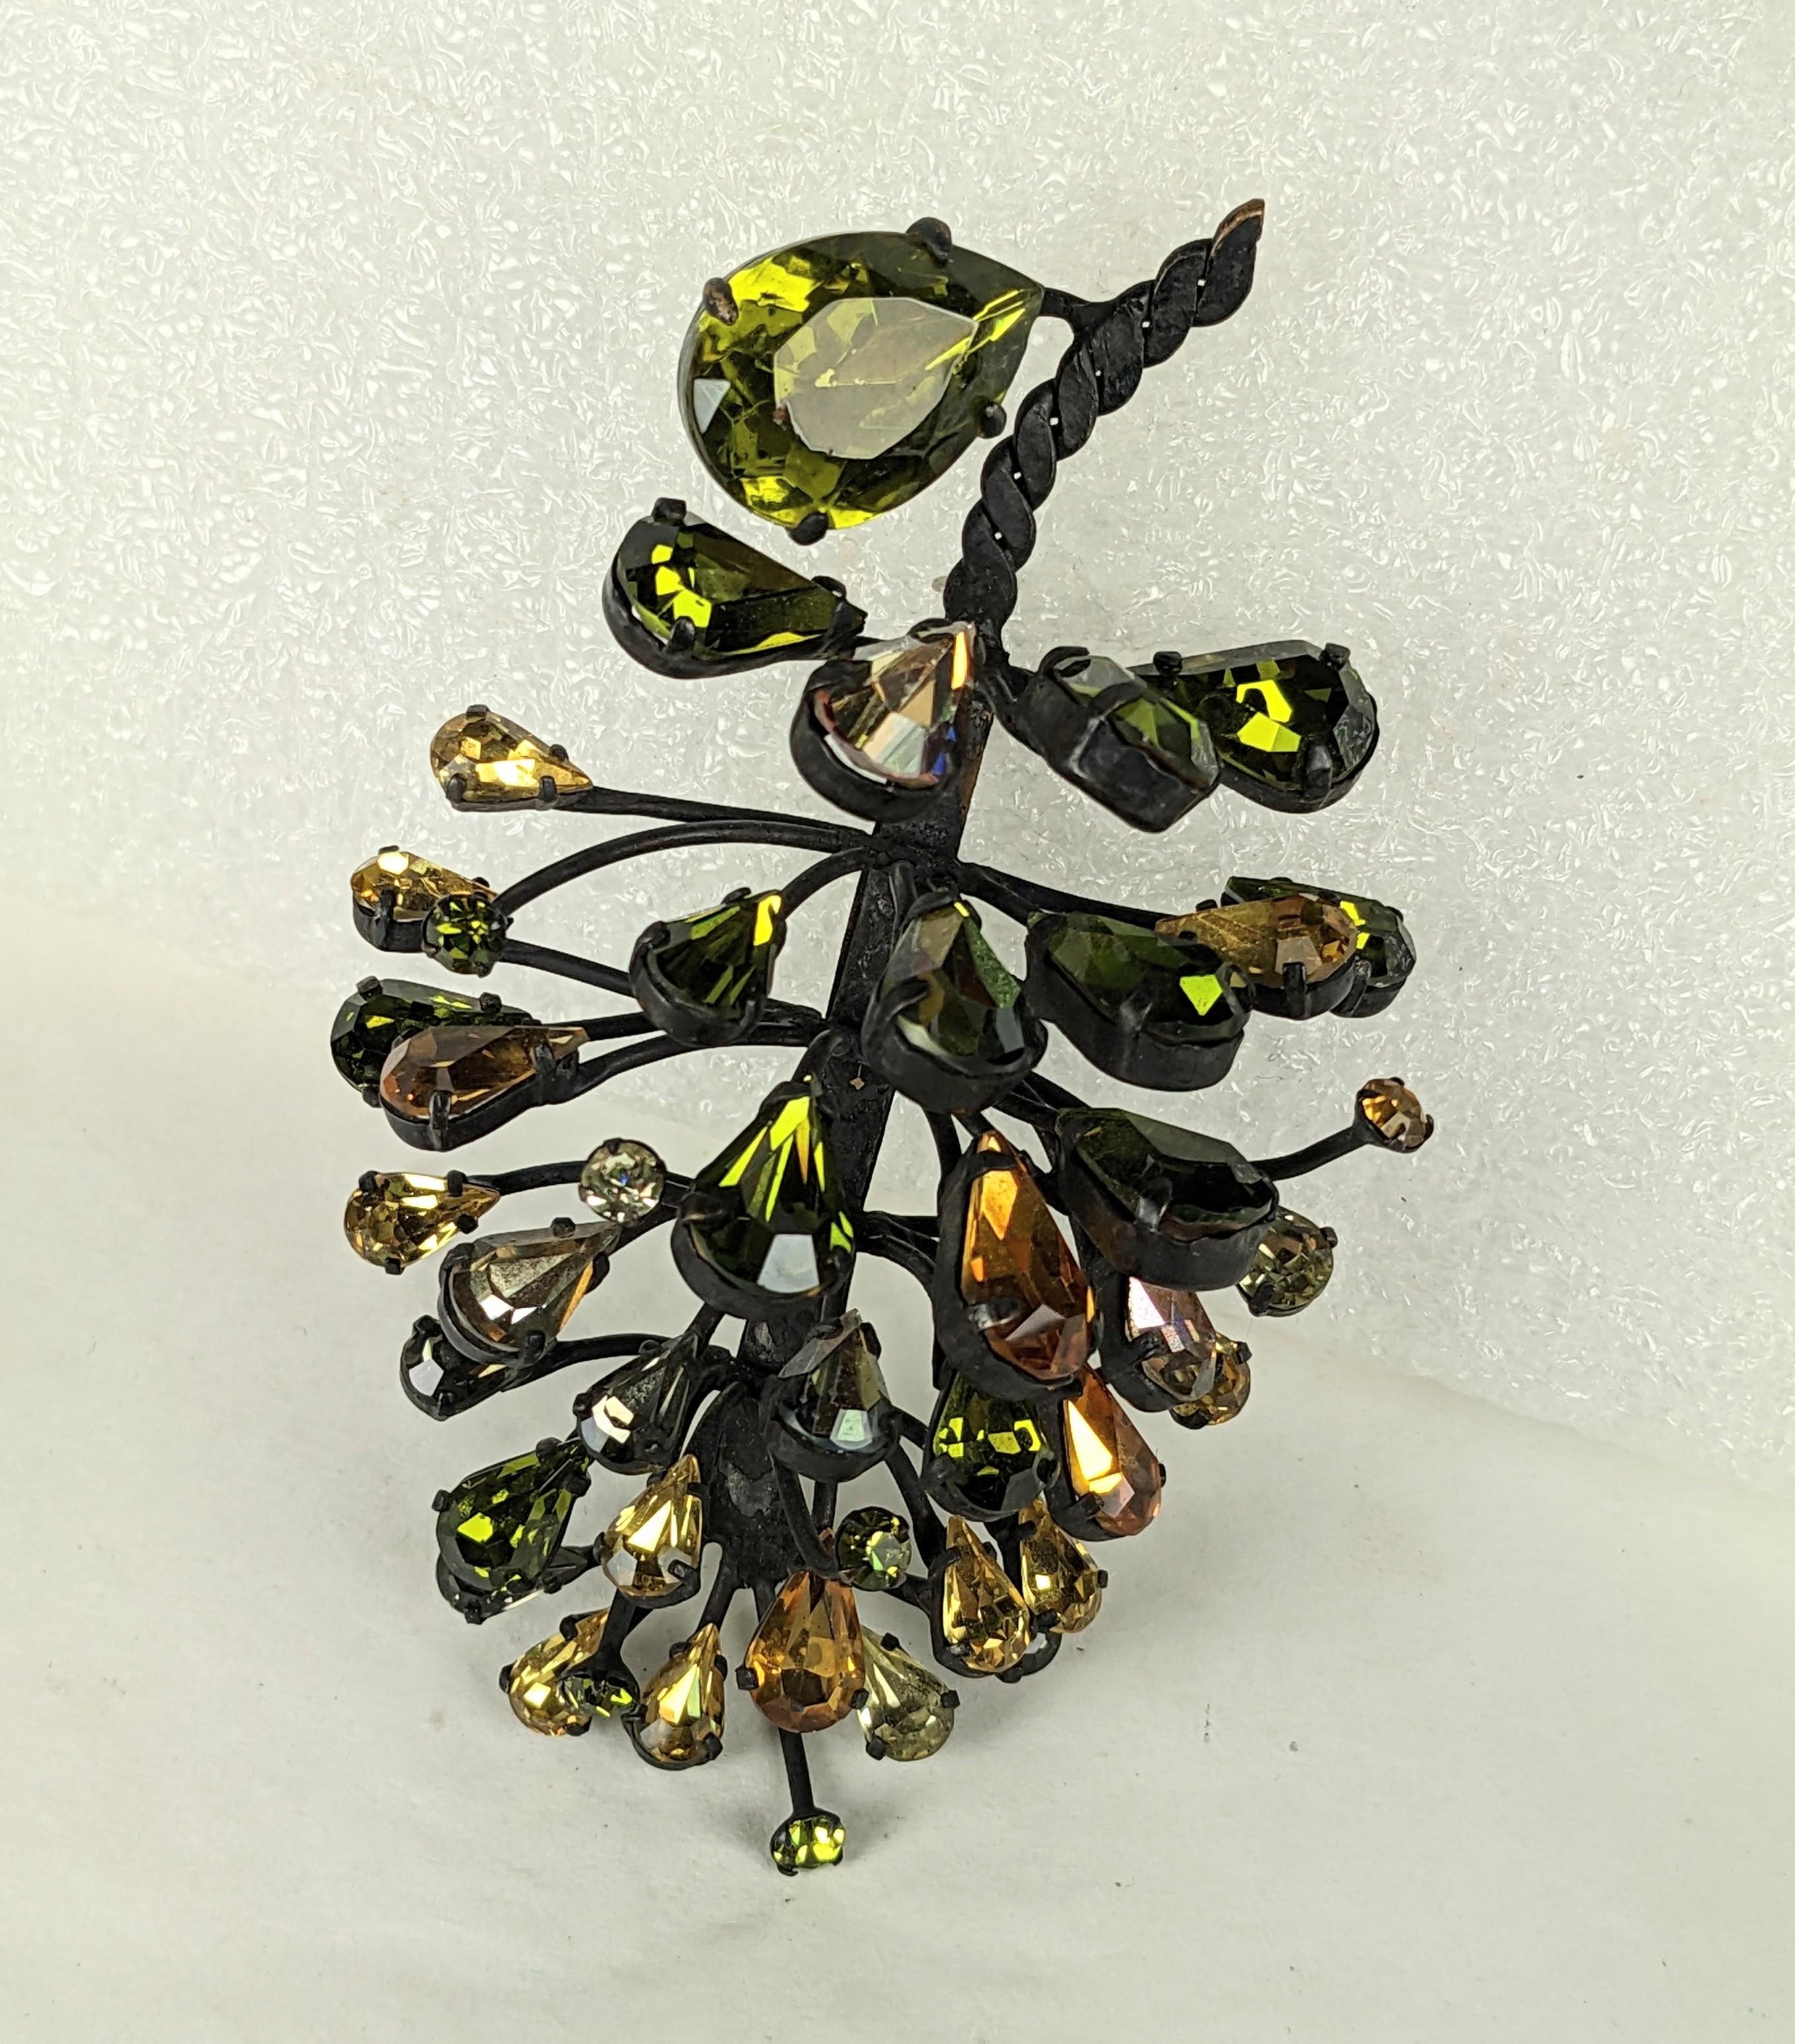 Amazing Countess Cis Jeweled Pine Cone Brooch from the 1950's. Very dimesional and completely hand made of twisted metalwork and colored crystals in tones of citrine and peridot, all set in blacked bronze finish. 1950's France. 3.5